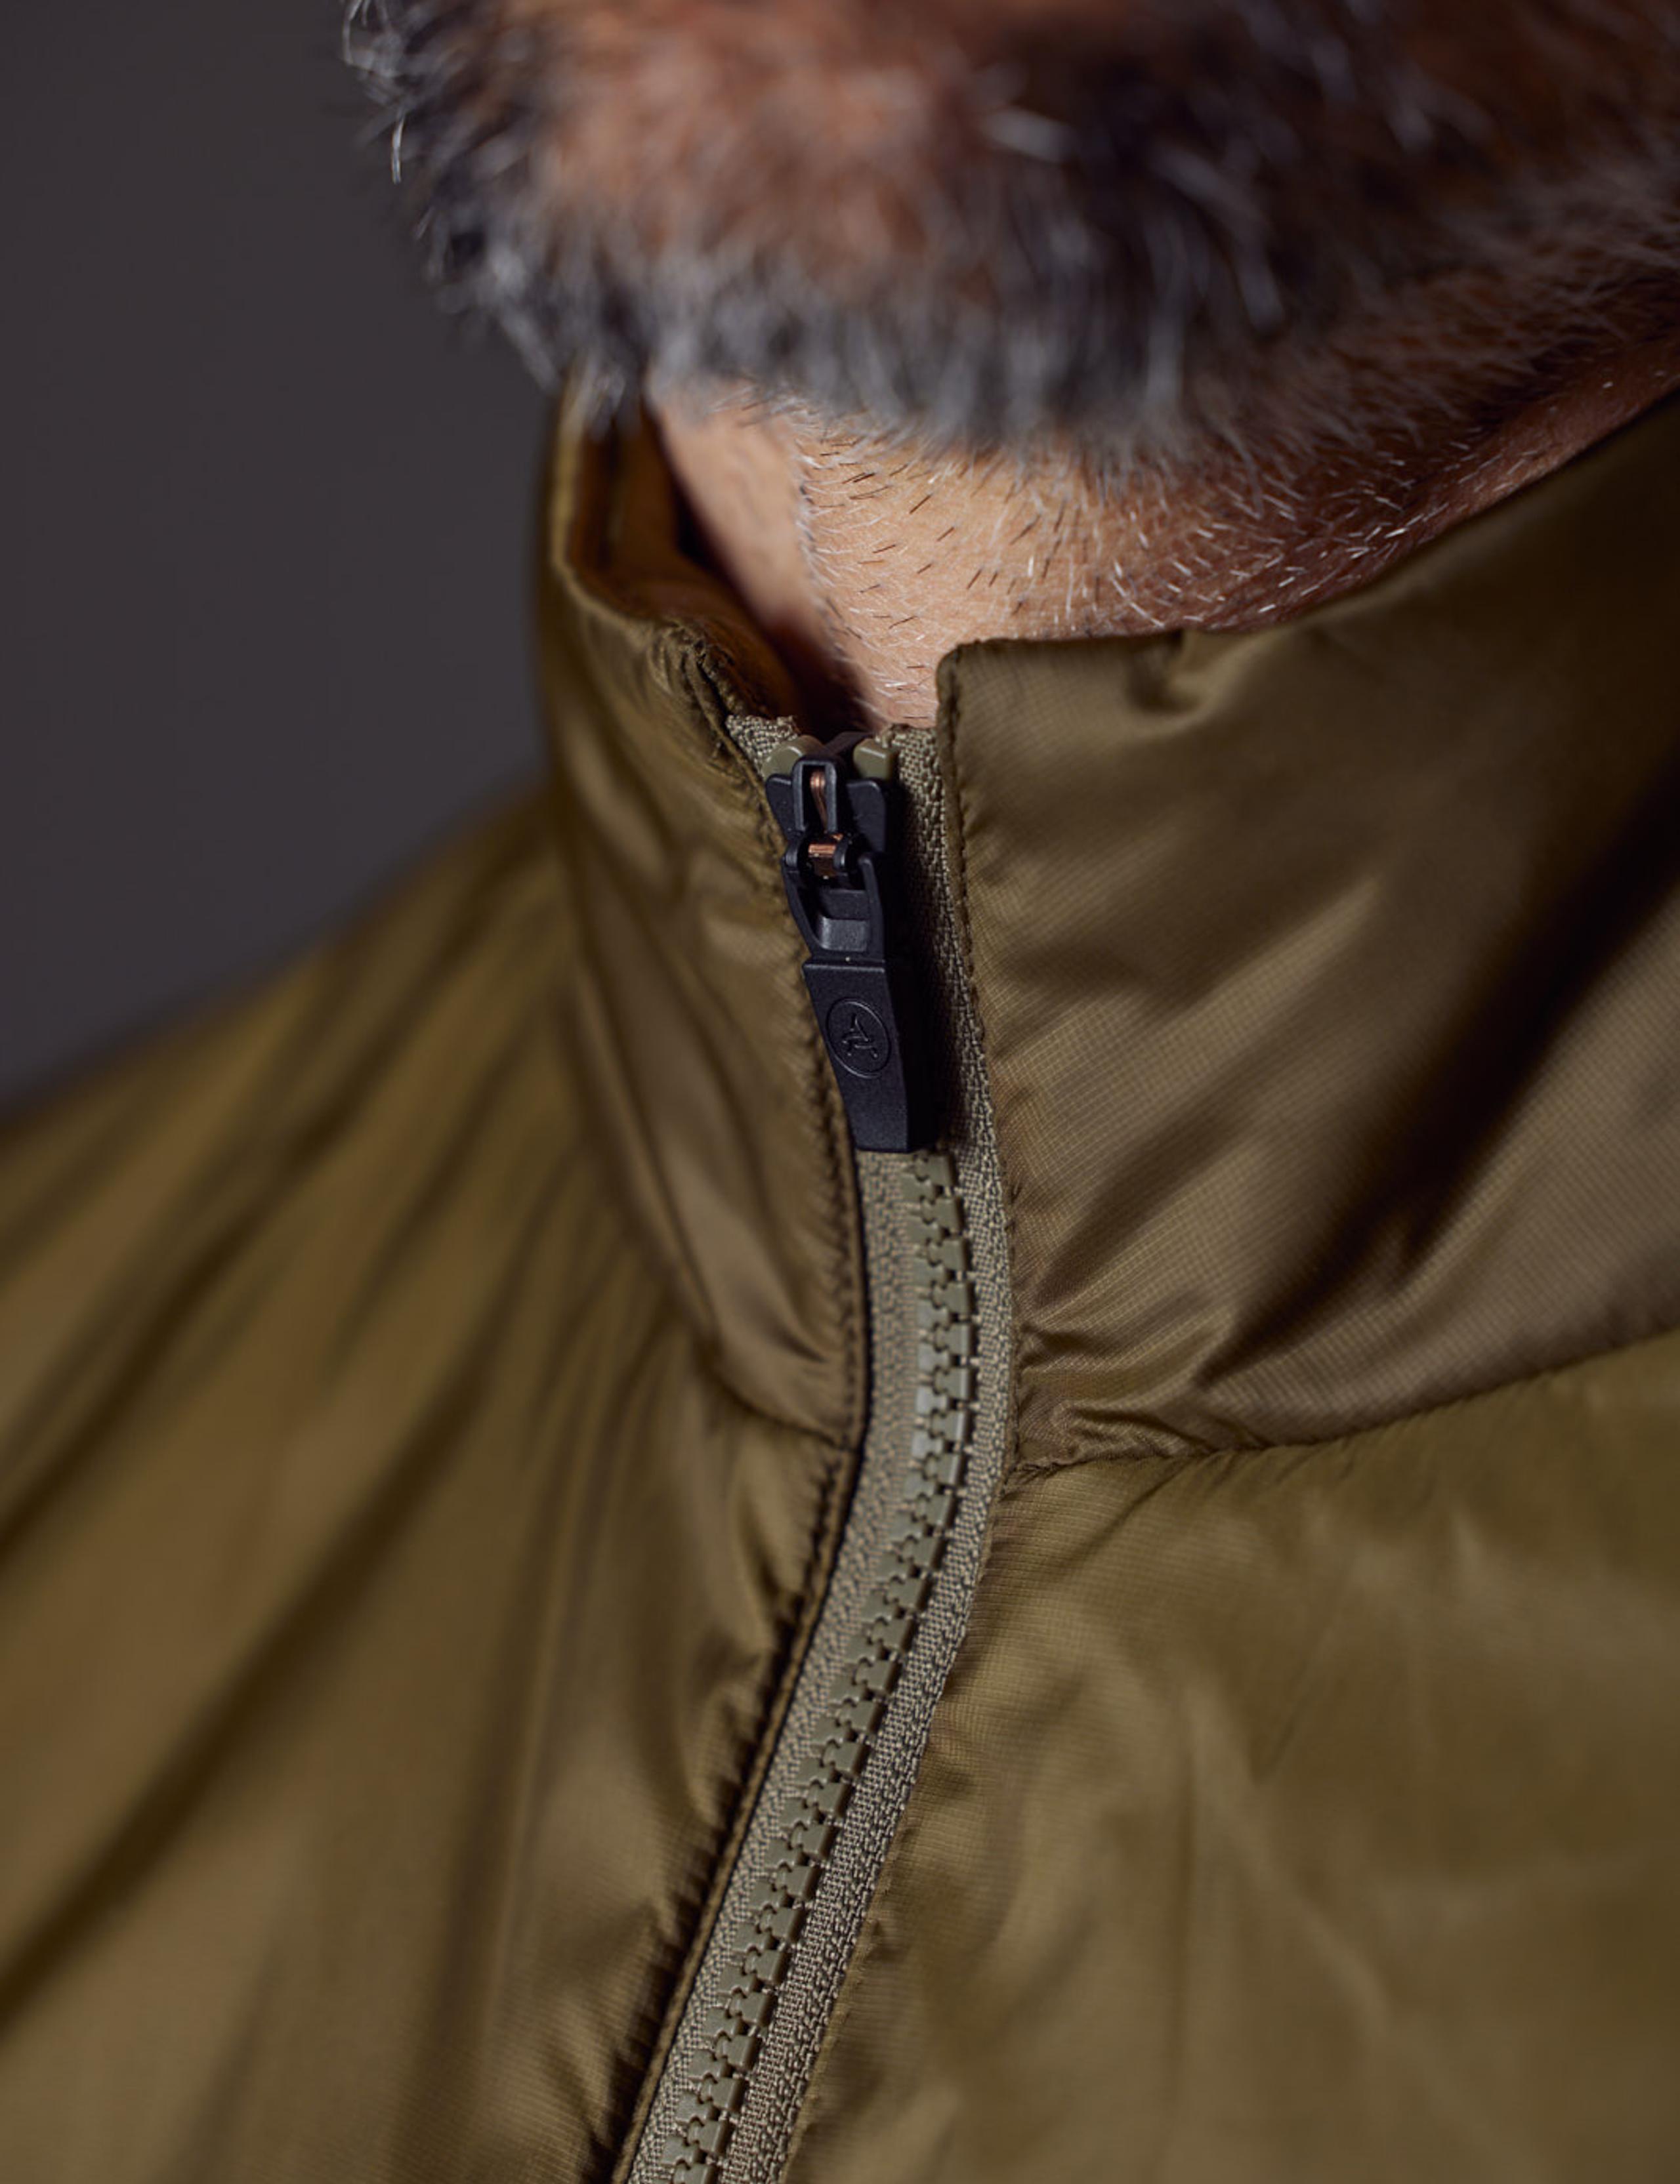 Detail of Eco Insulated Vest